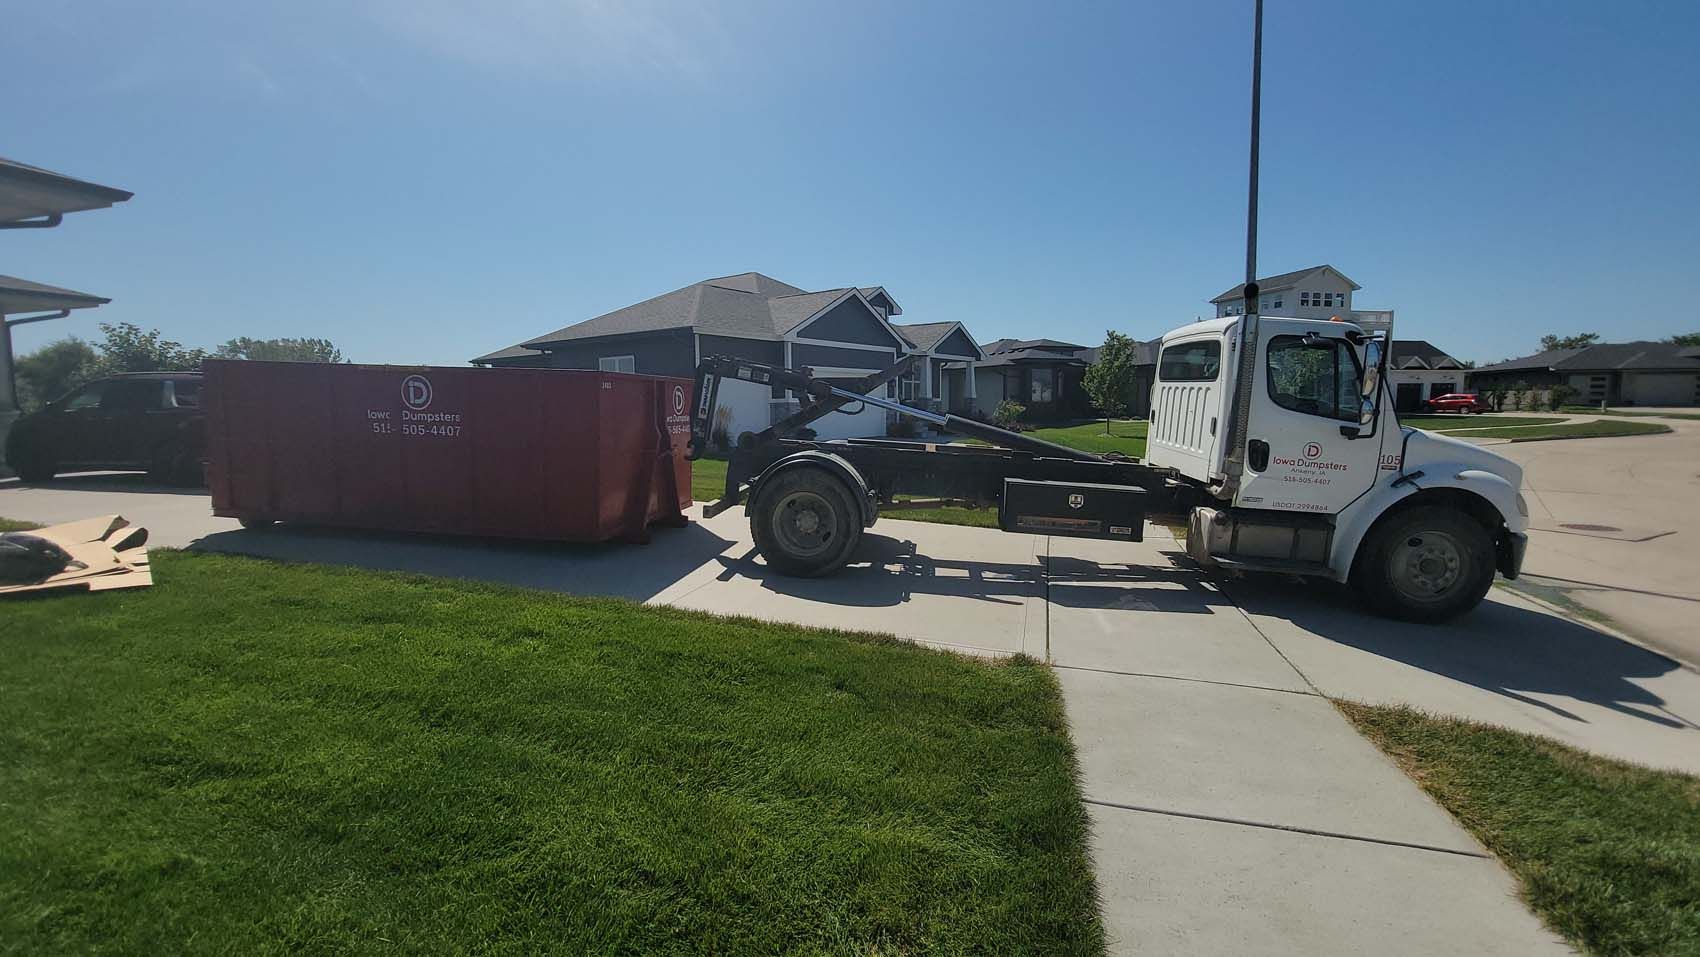 Trailer truck pulling a dumpster can